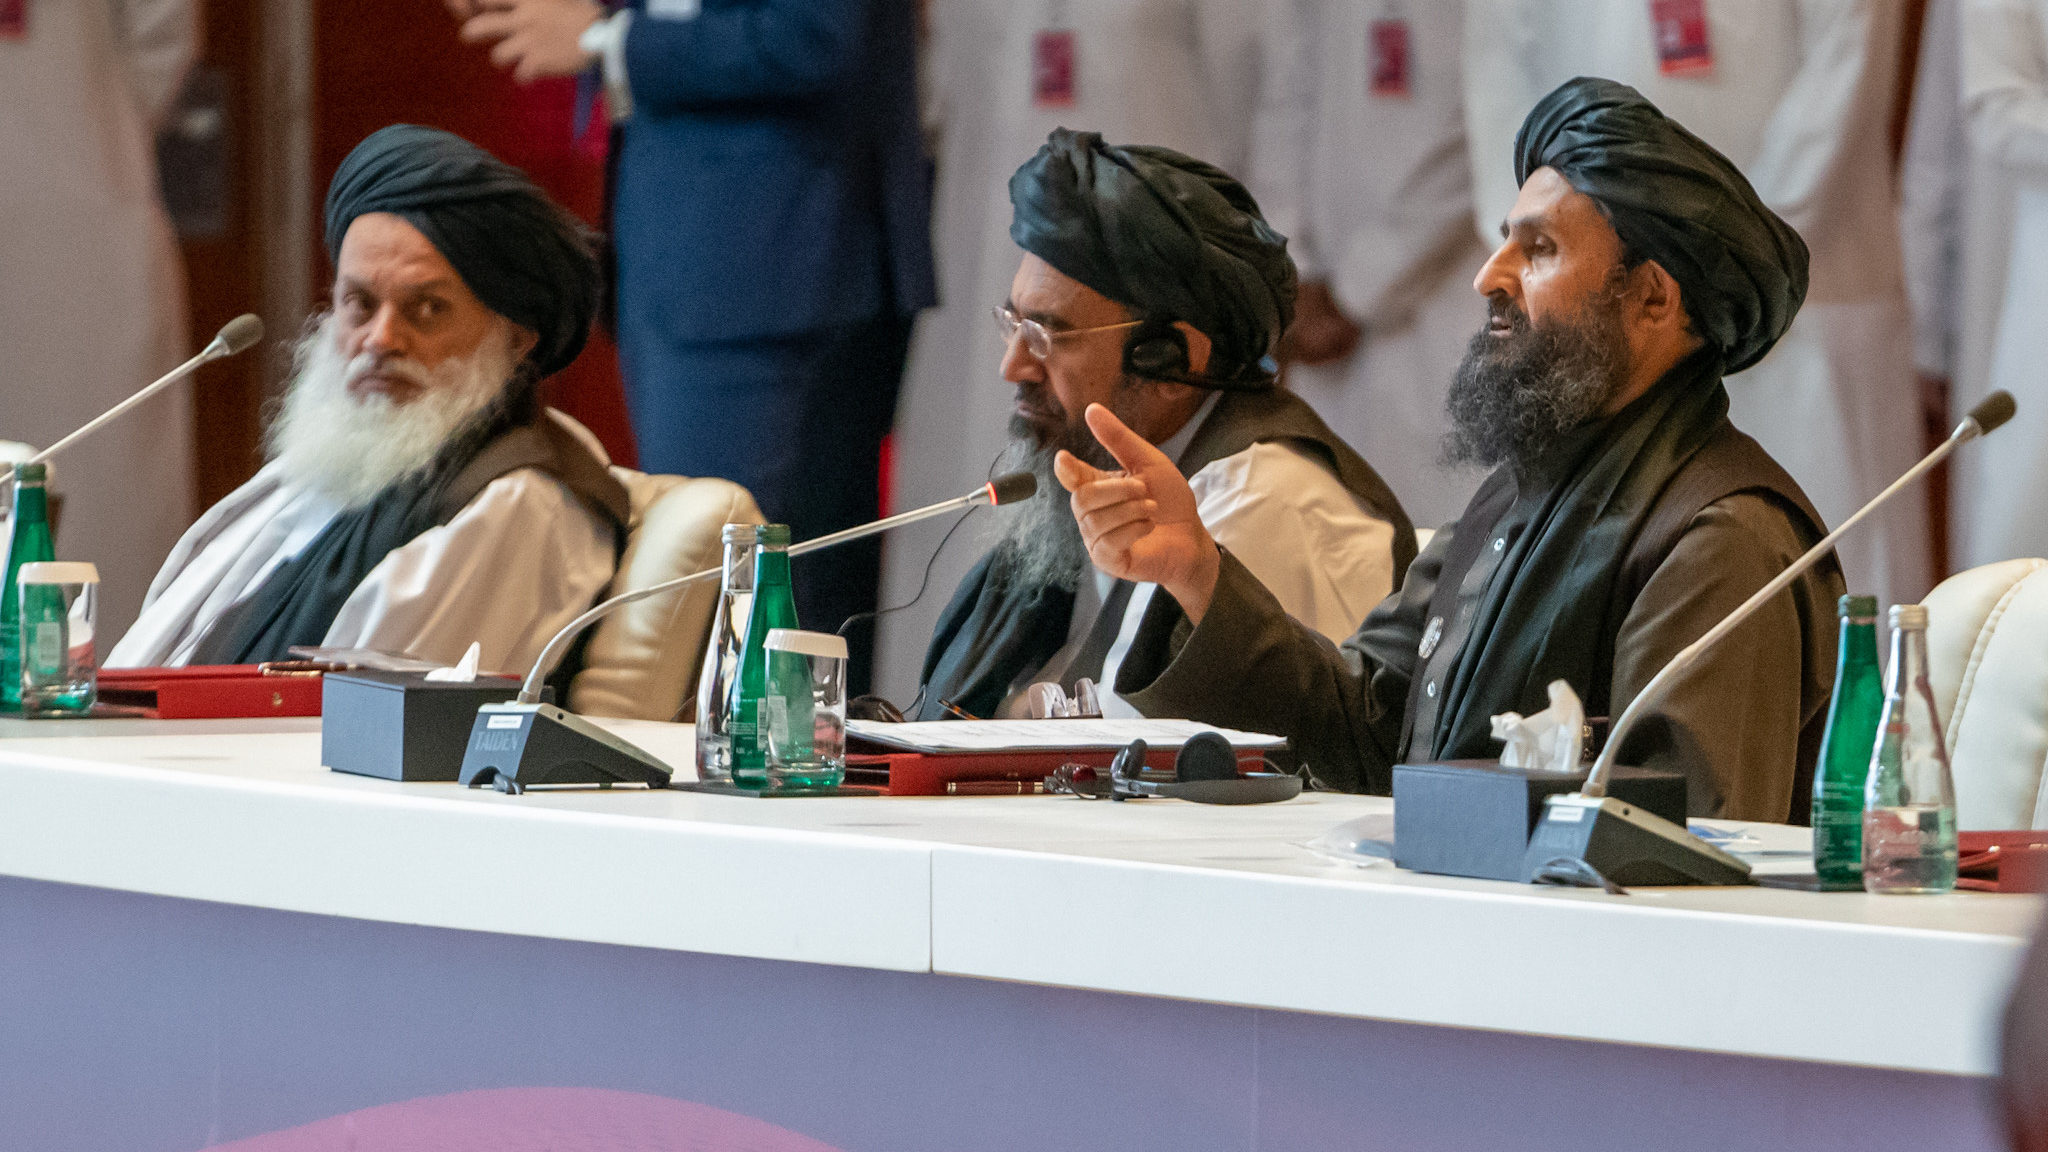 The Taliban Reconciliation Conference